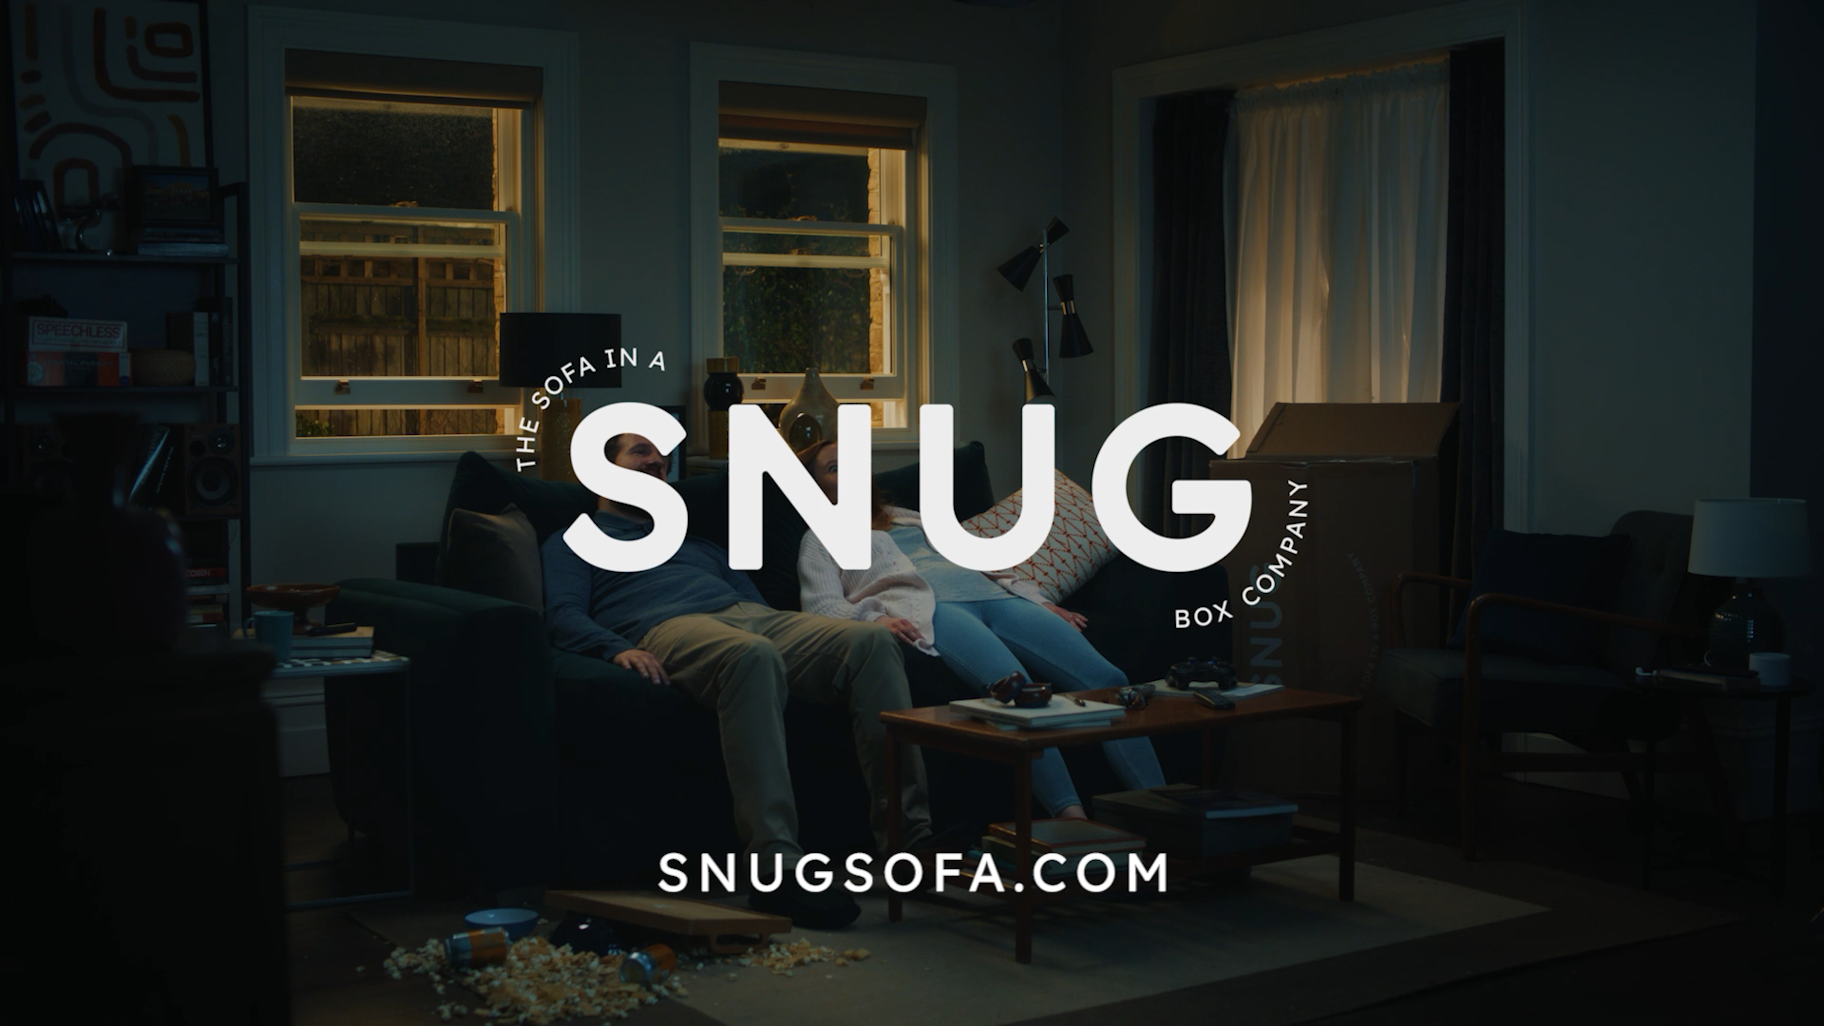 SNUG 'New Realm of Cosy' -